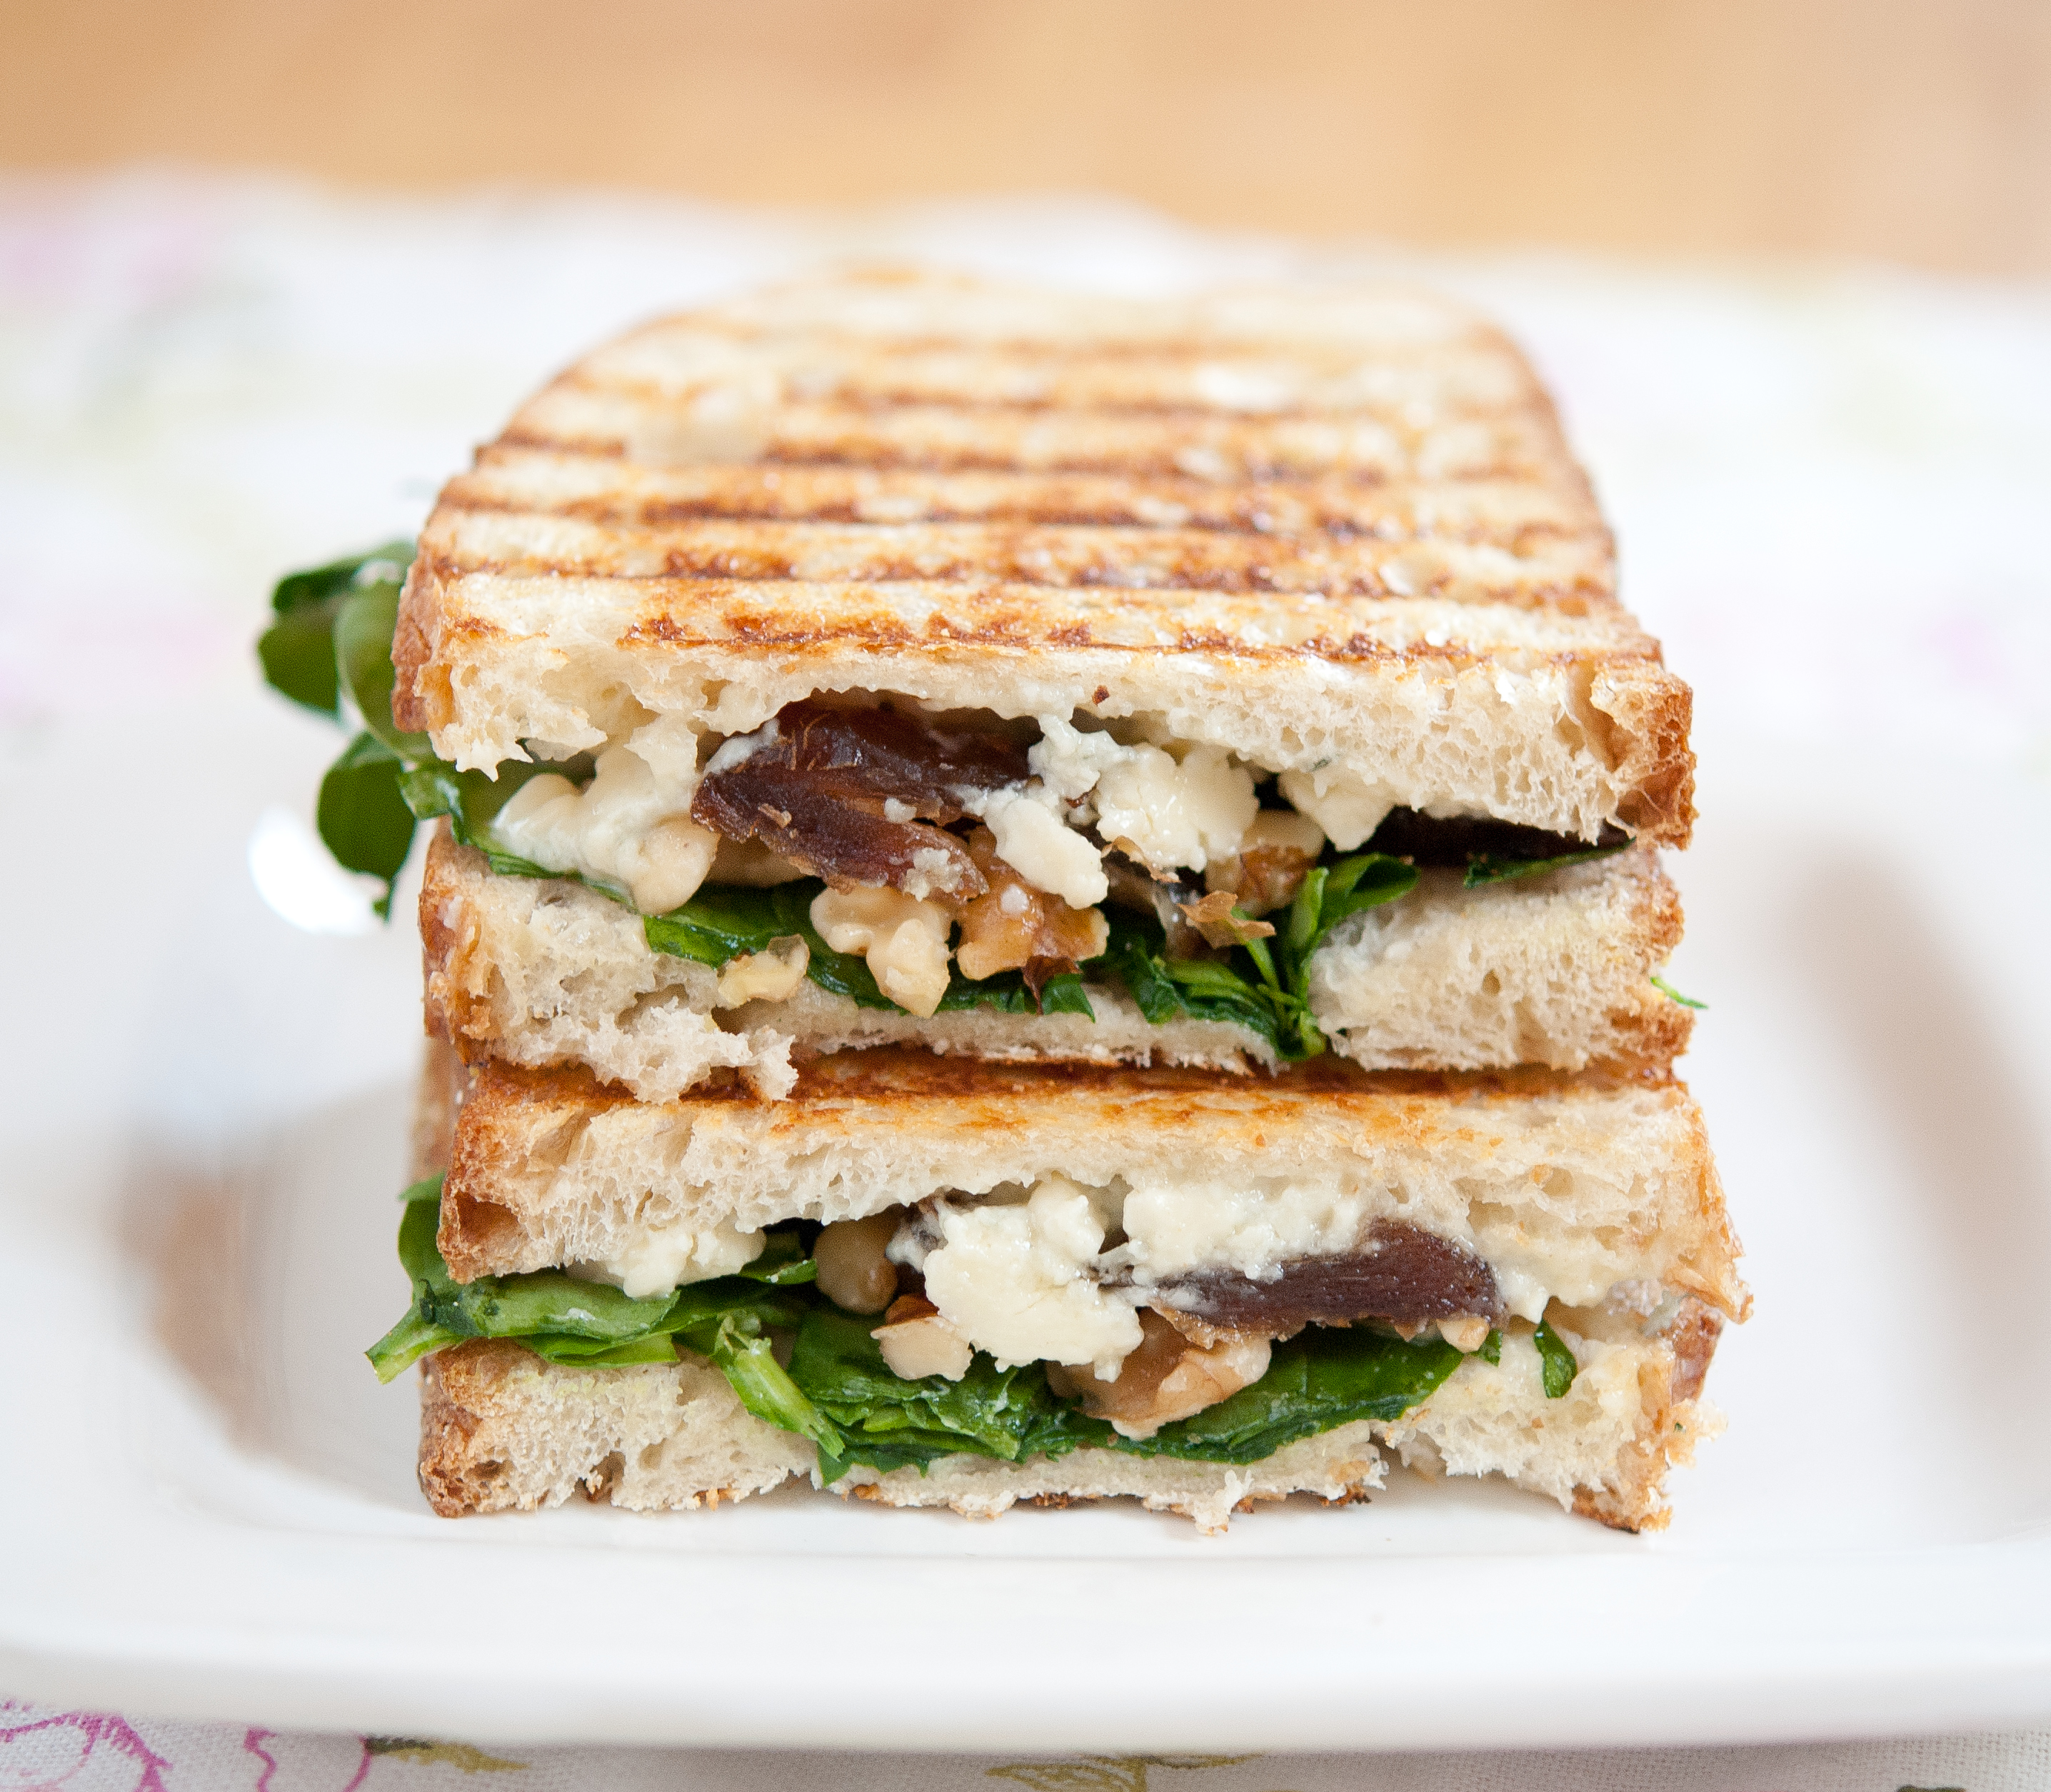 Date, Walnut & Gorgonzola Grilled Cheese - Baked In